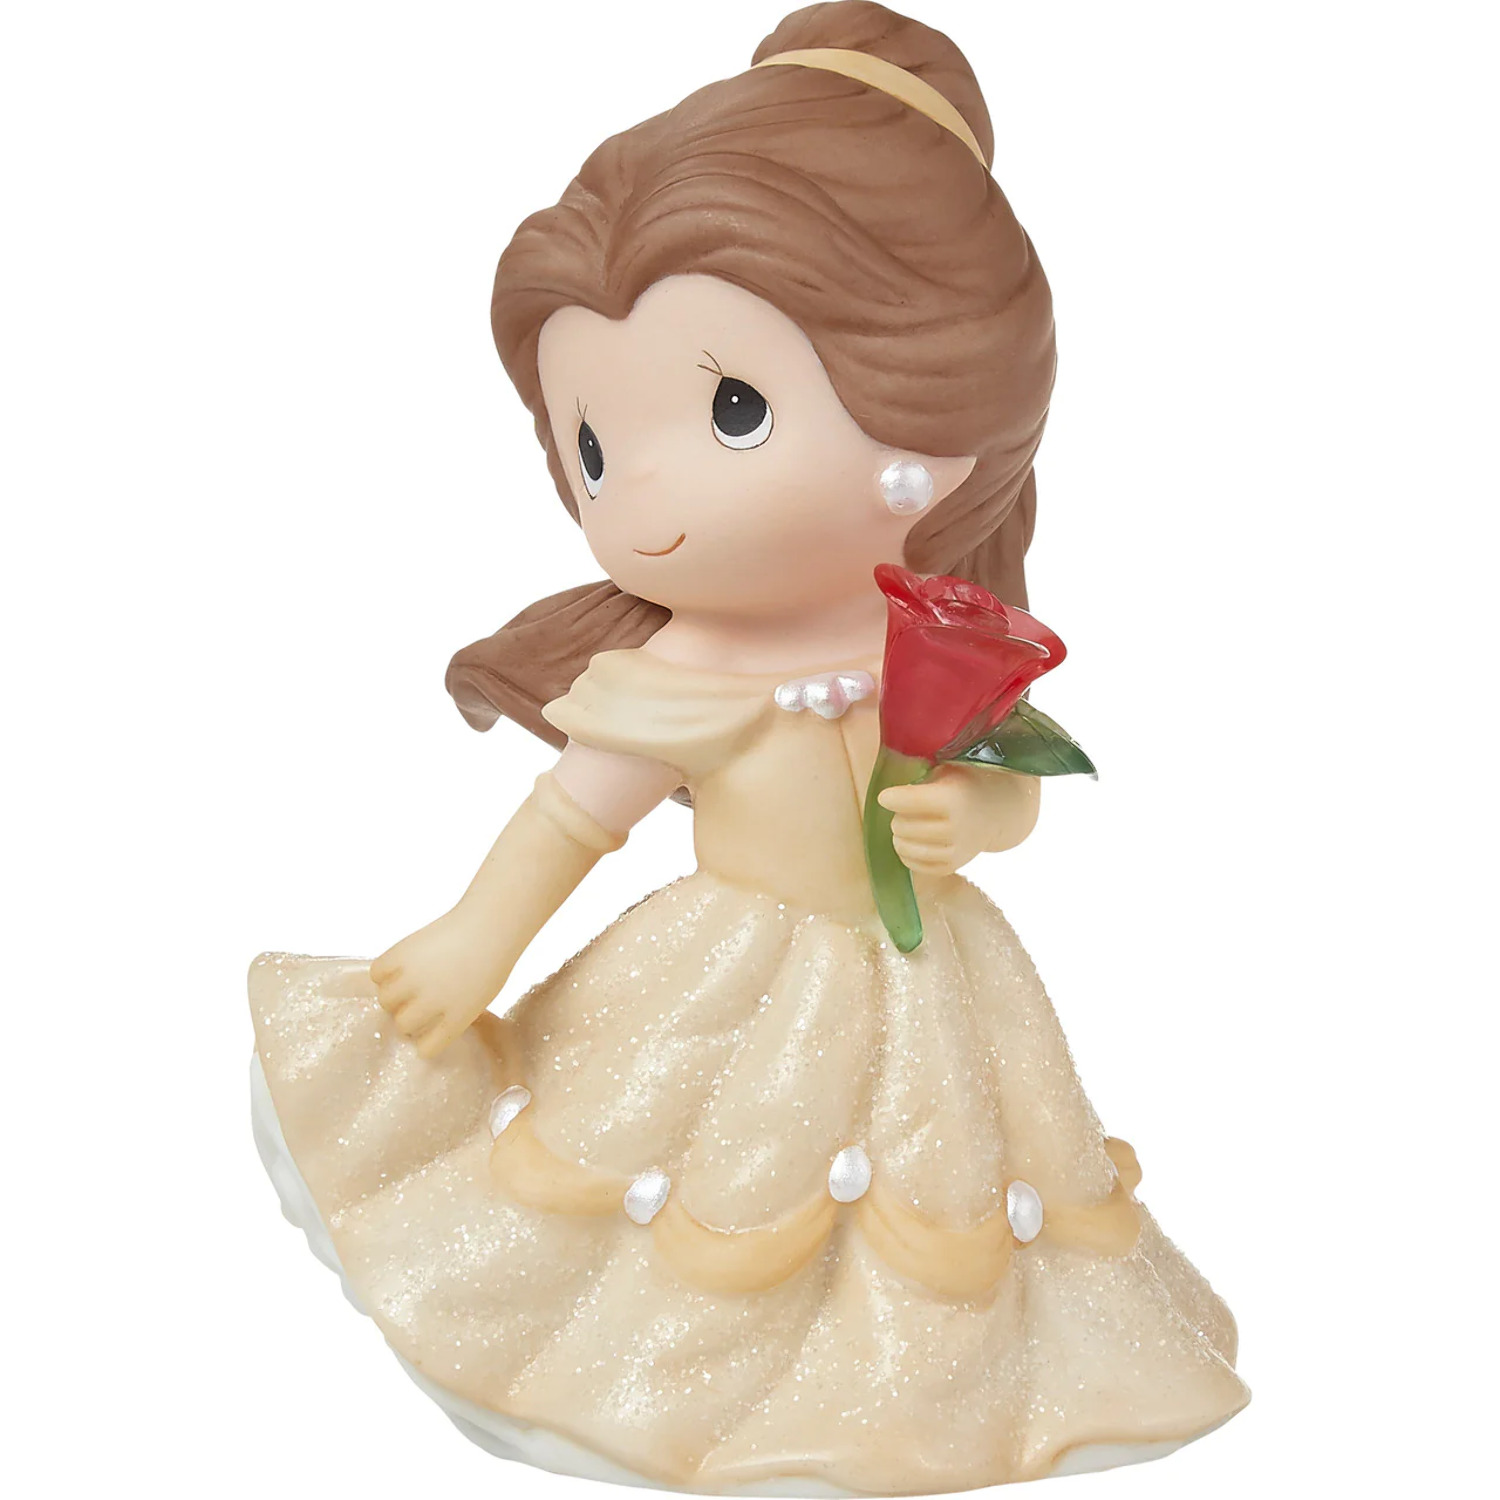 Precious Moments Disney Belle An Enchanting Moment Awaits Figurine #222028 - image 3 of 4